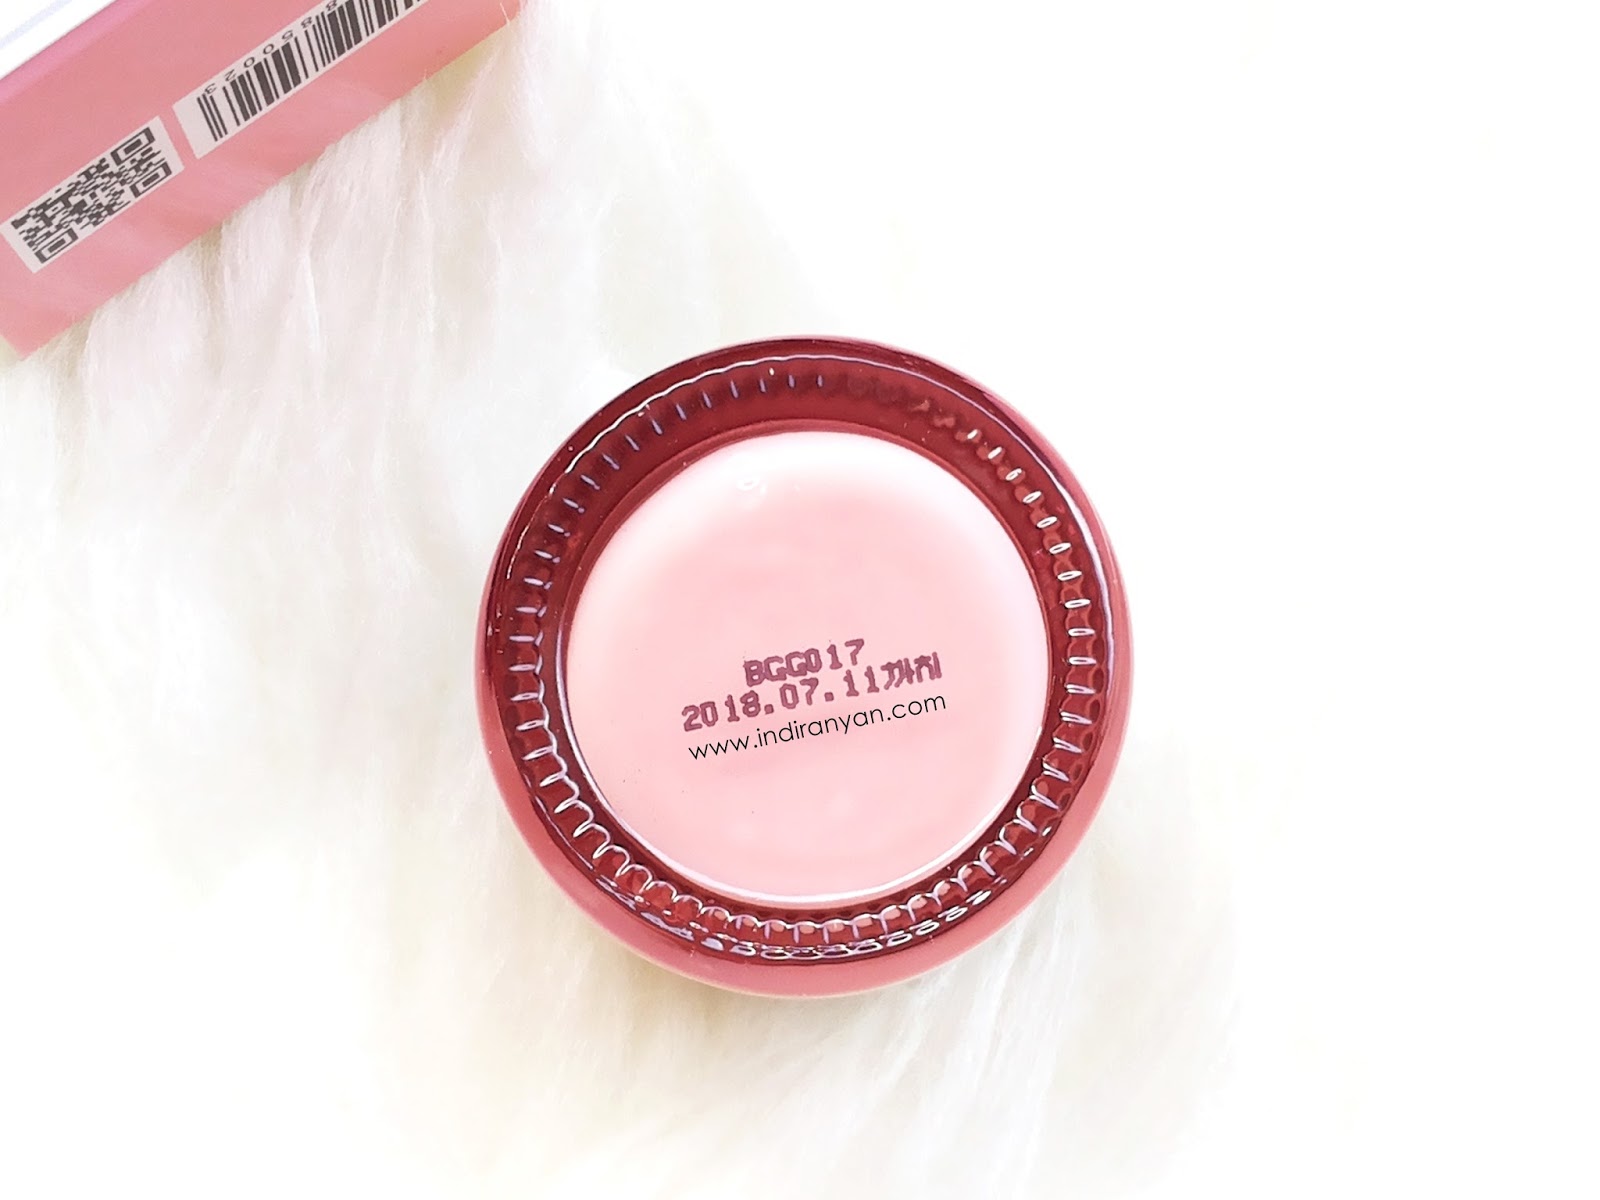 petitfee-oil-blossom-lip-mask-review, review-petitfee-oil-blossom-lip-mask, petitfee-oil-blossom-lip-mask